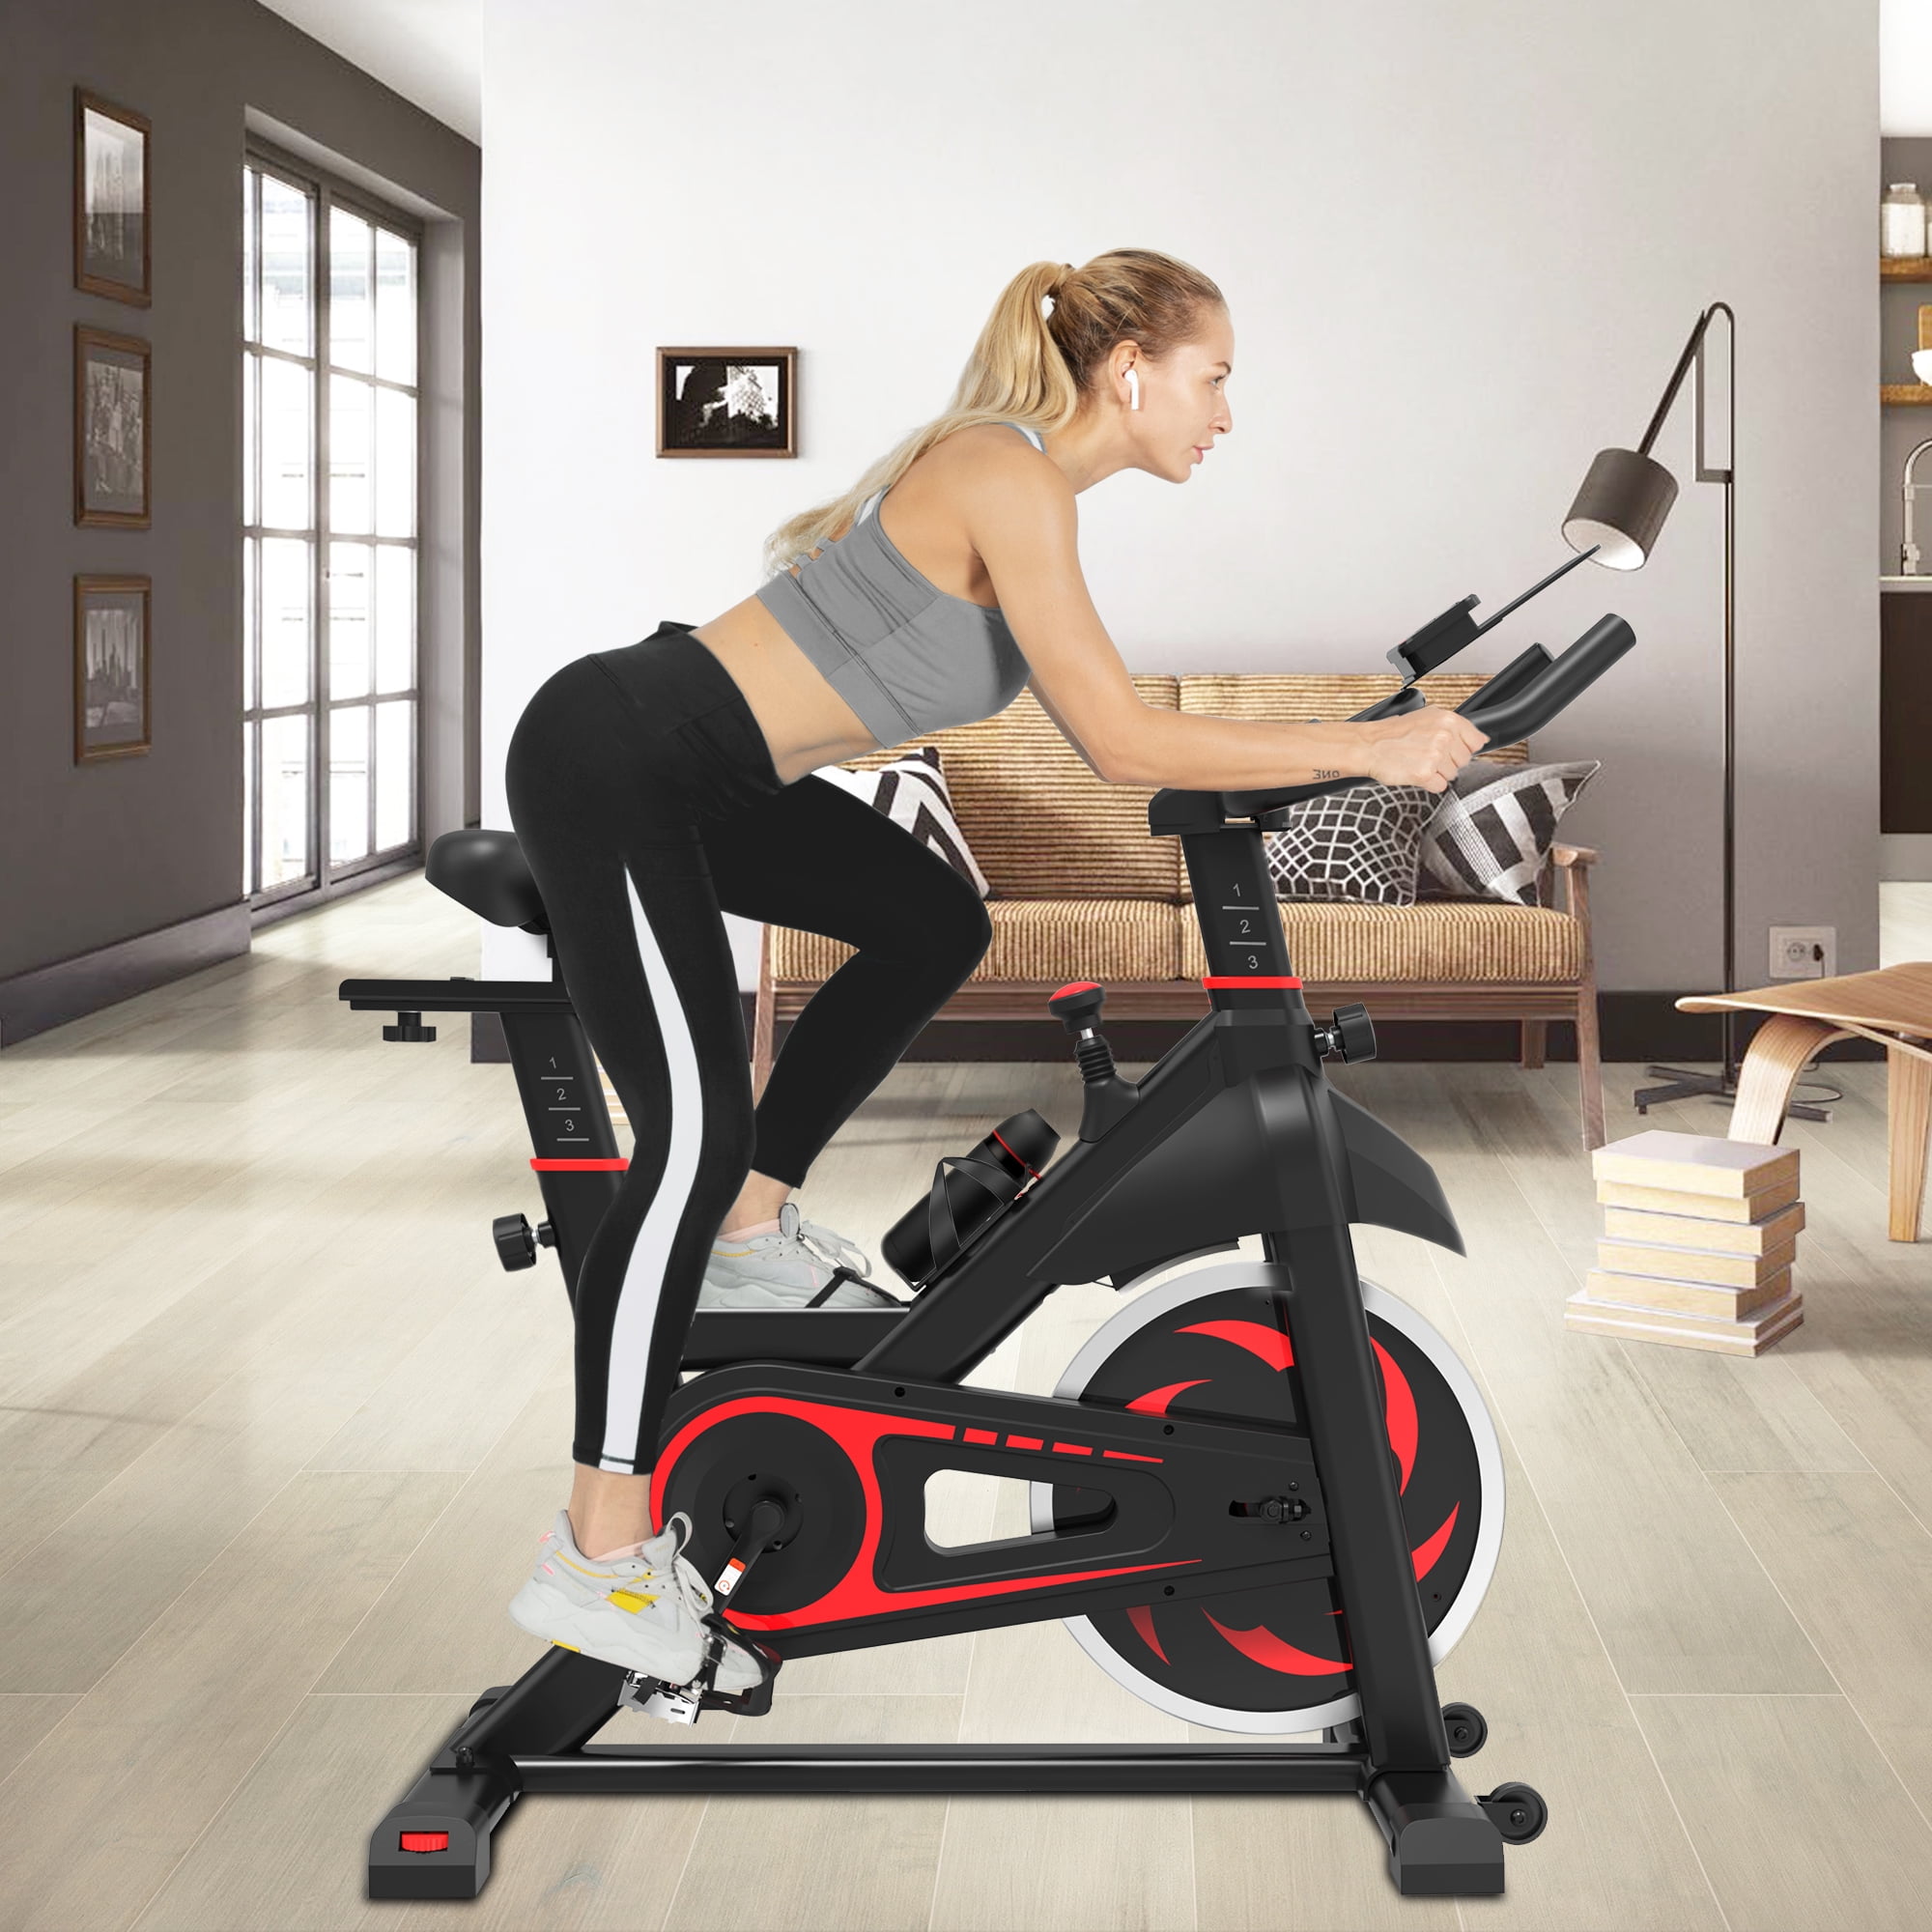 Aerobic Fitness Exercise Bike Indoor Training Bicycle Cardio Workout Gym Cycling 